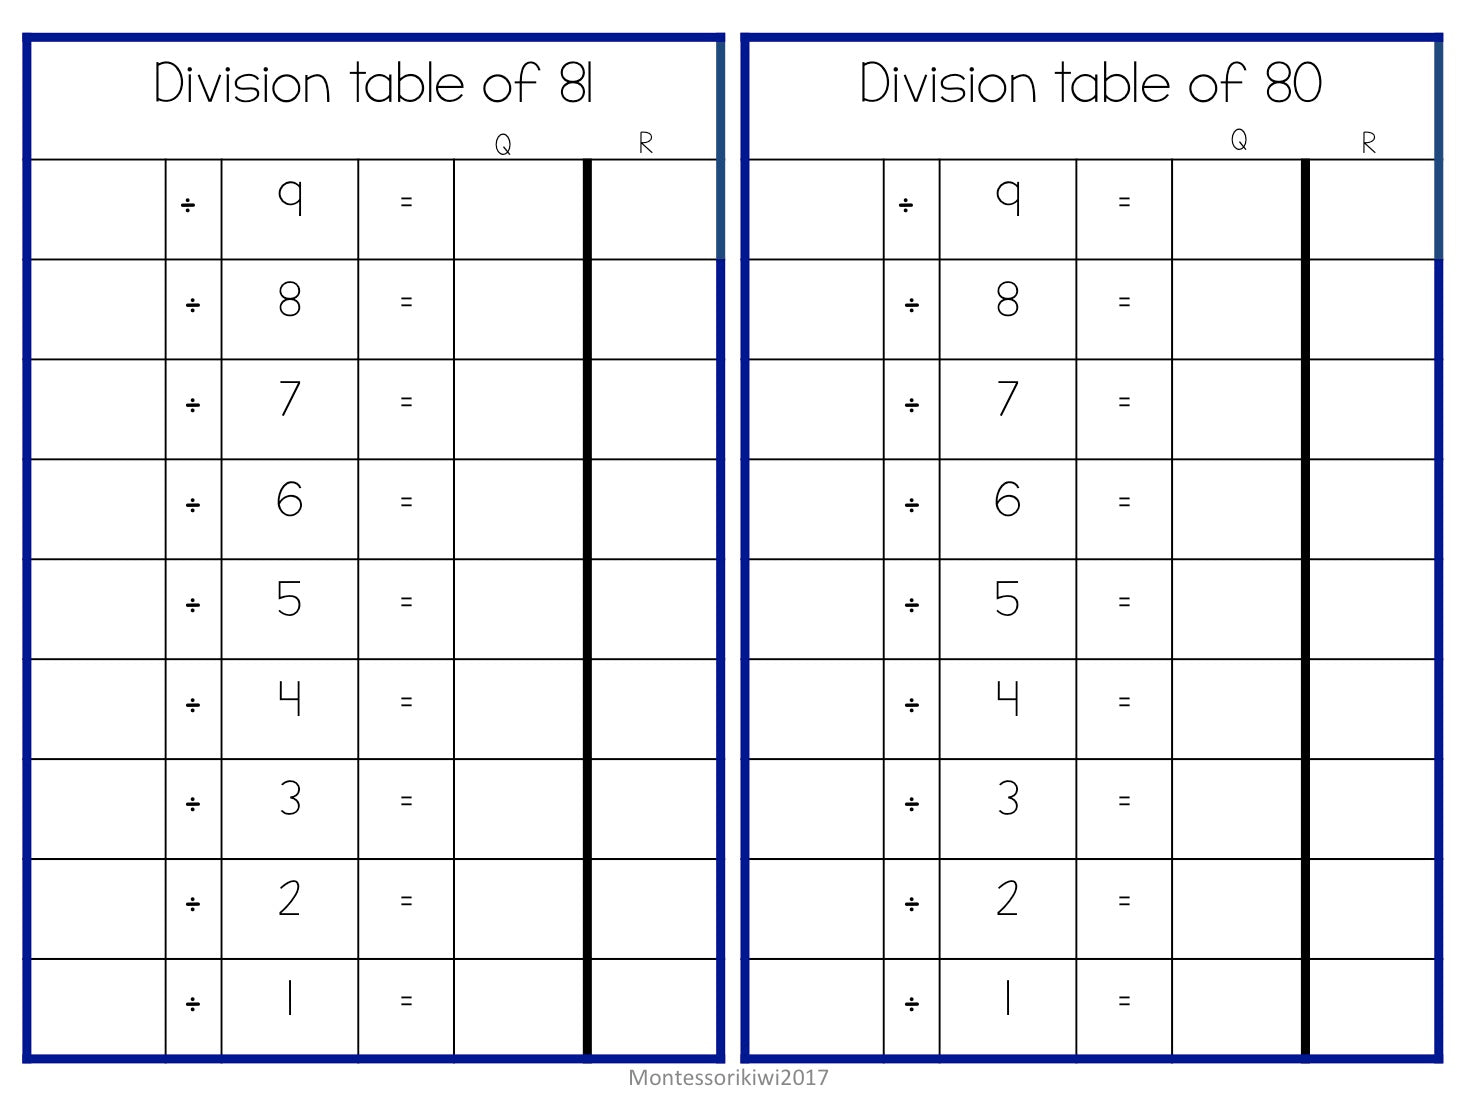 Division Chart Tables - montessorikiwi